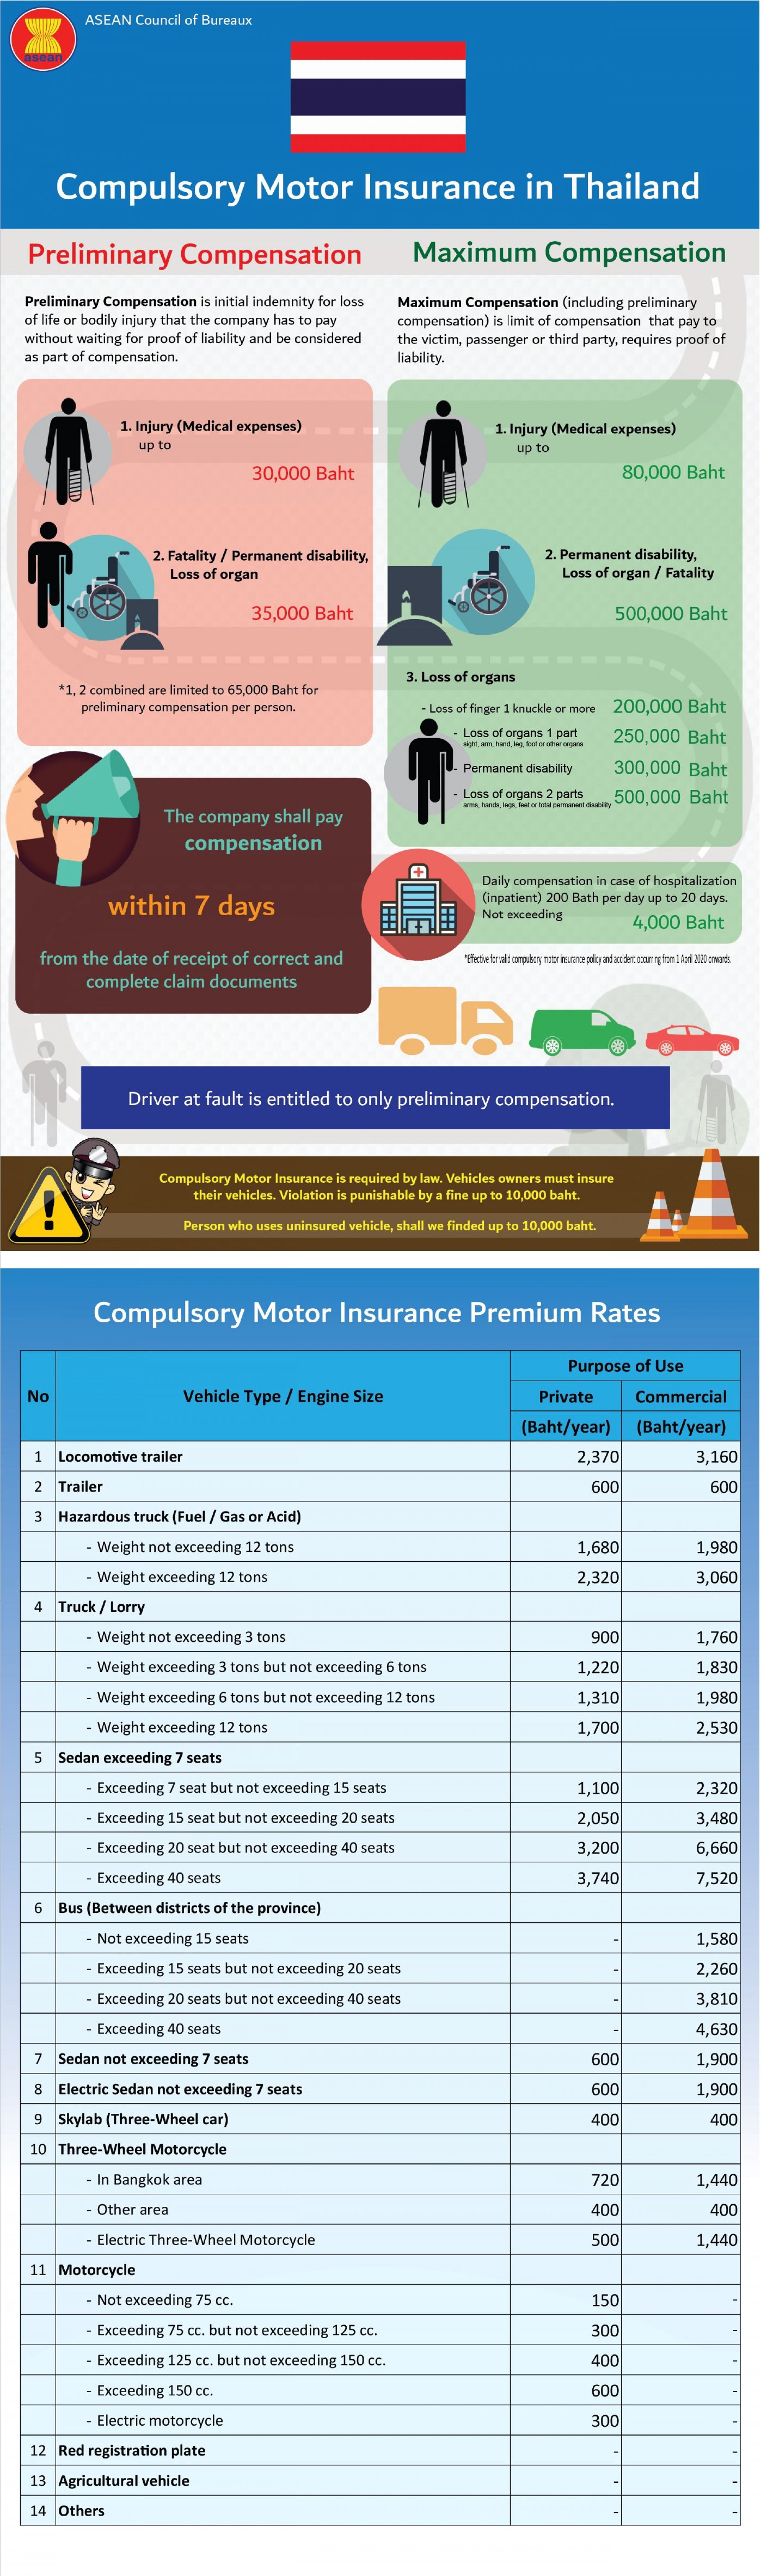 Compulsory Motor Insurance coverage information of Thailand